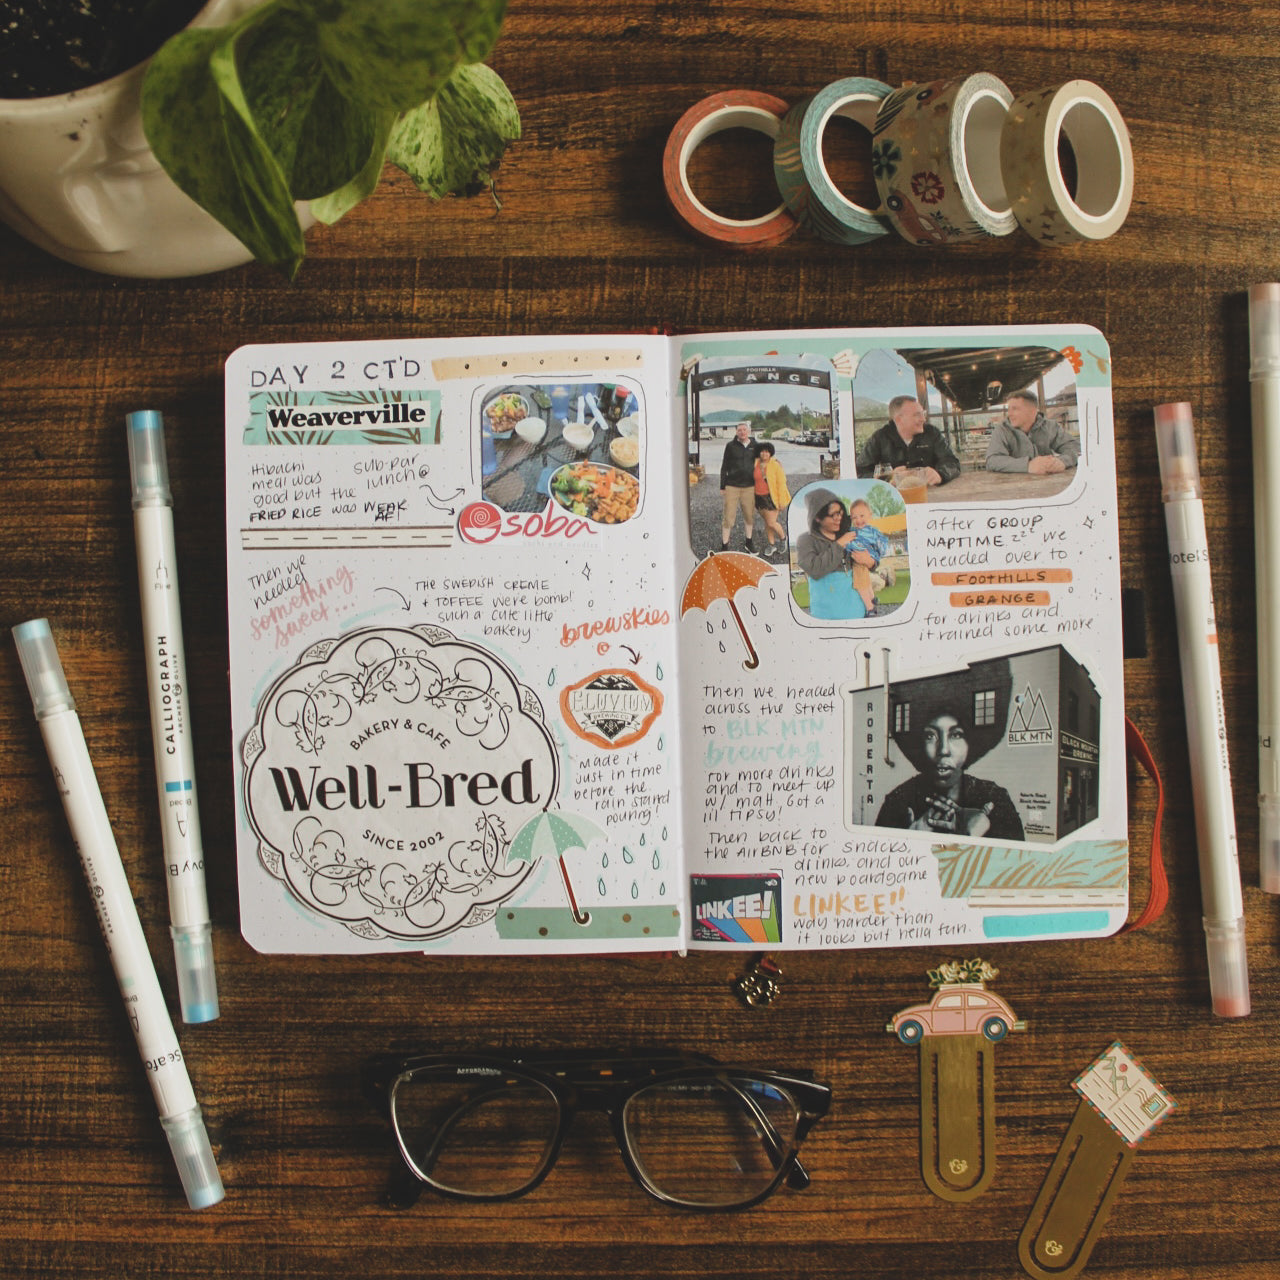 A dot grid notebook is lying open on a dark table. On the pages are travel memories spread including lettering, logos from businesses, stickers, and photos from the trip. On the table the notebook is surrounded by various stationery elements.